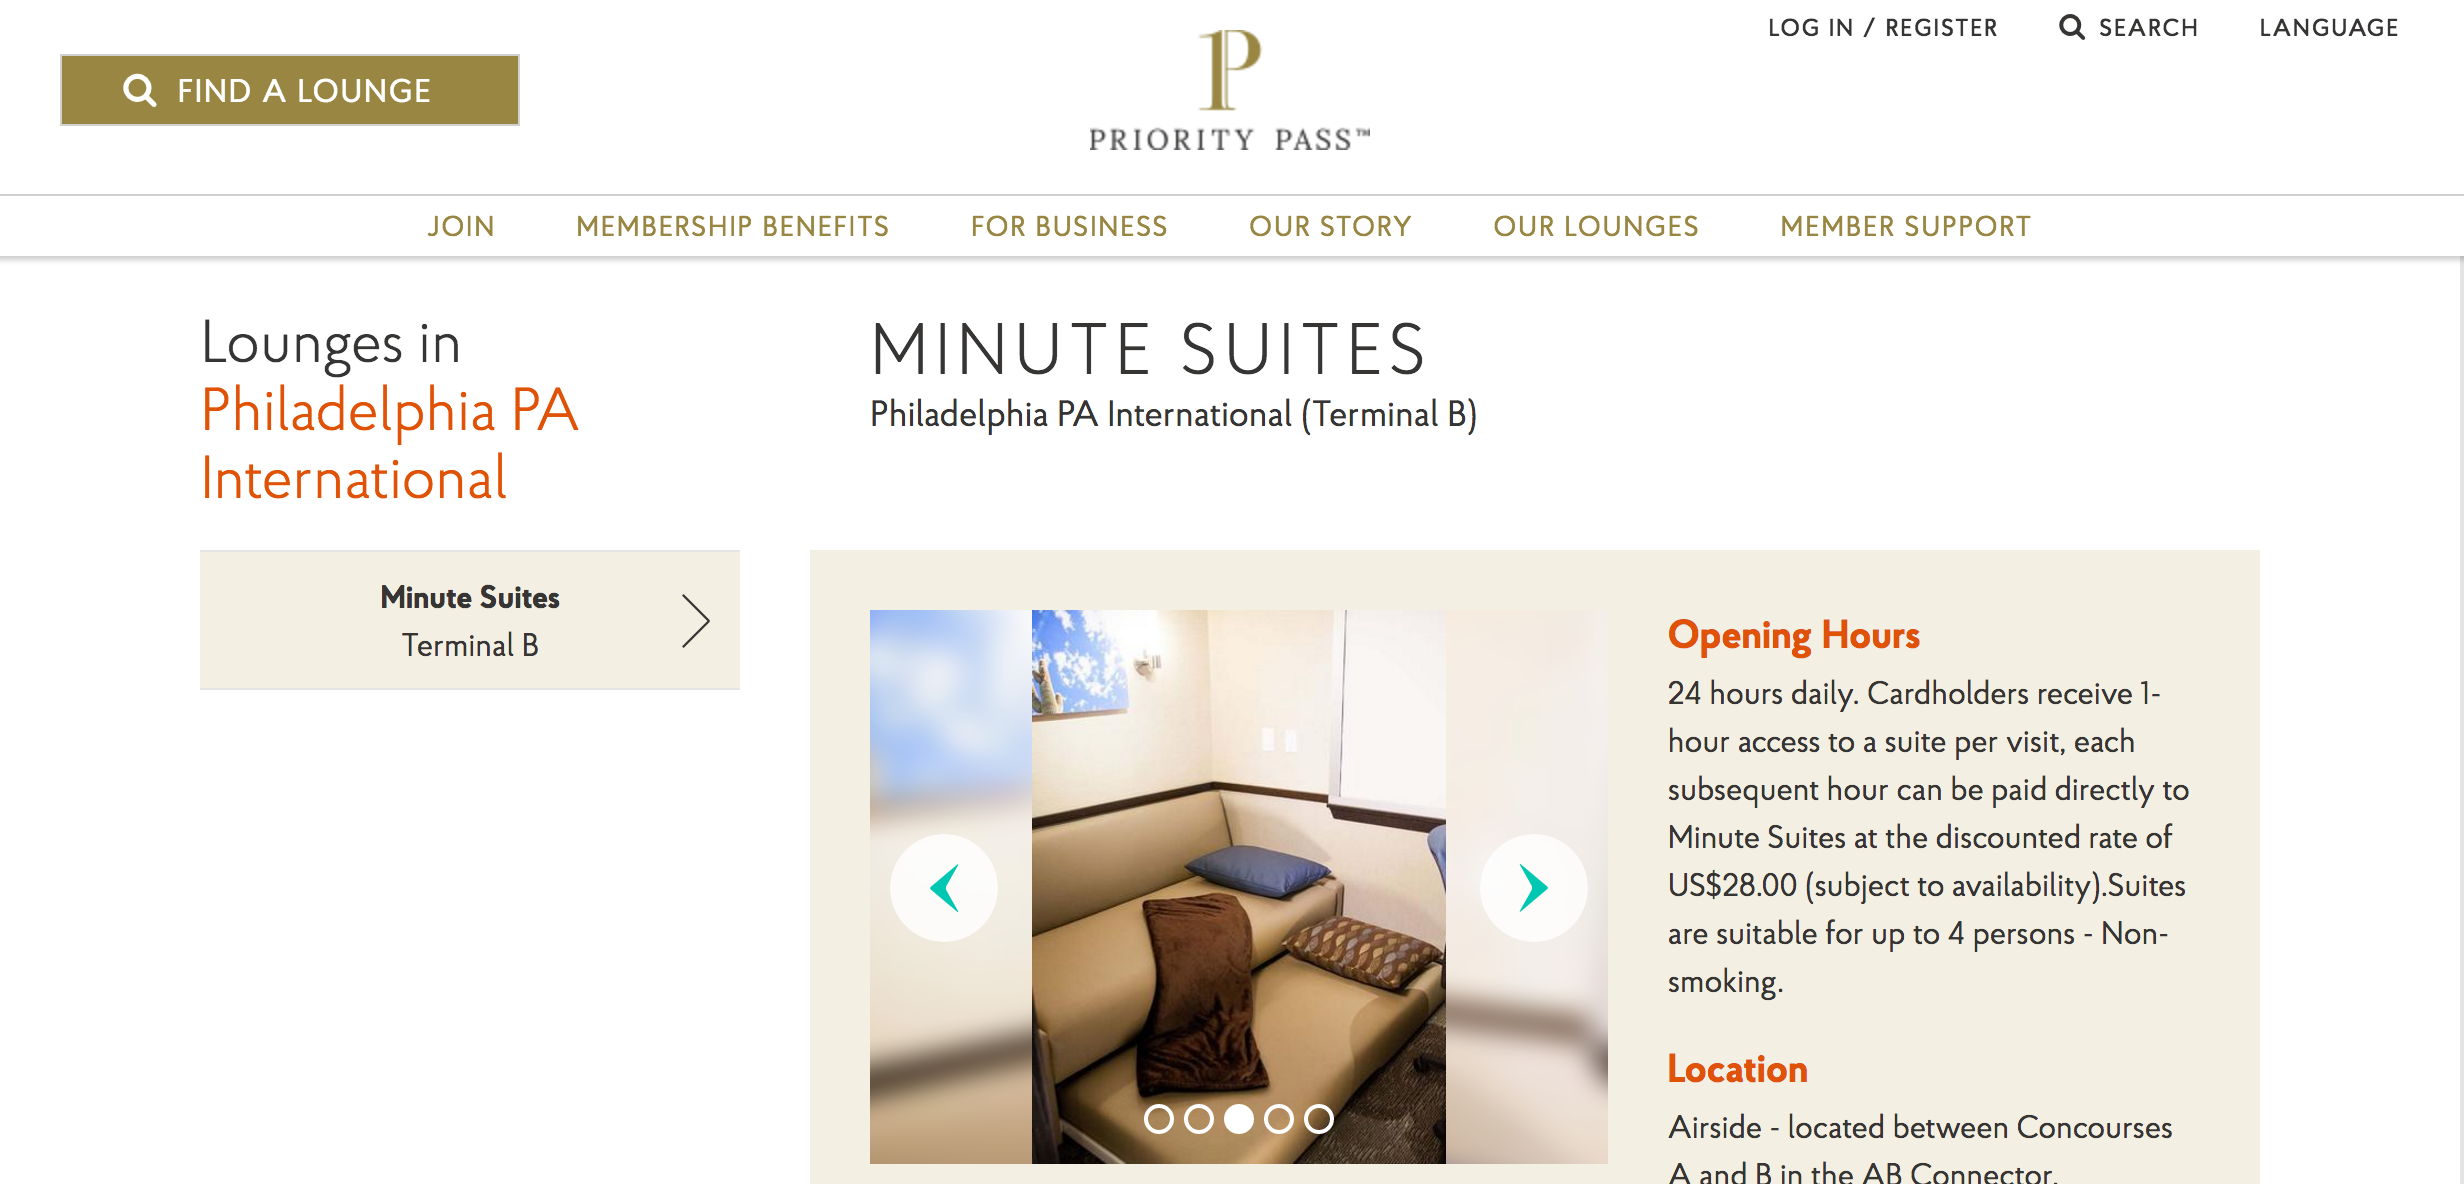 Minute Suites PHL (Image: Priority Pass)